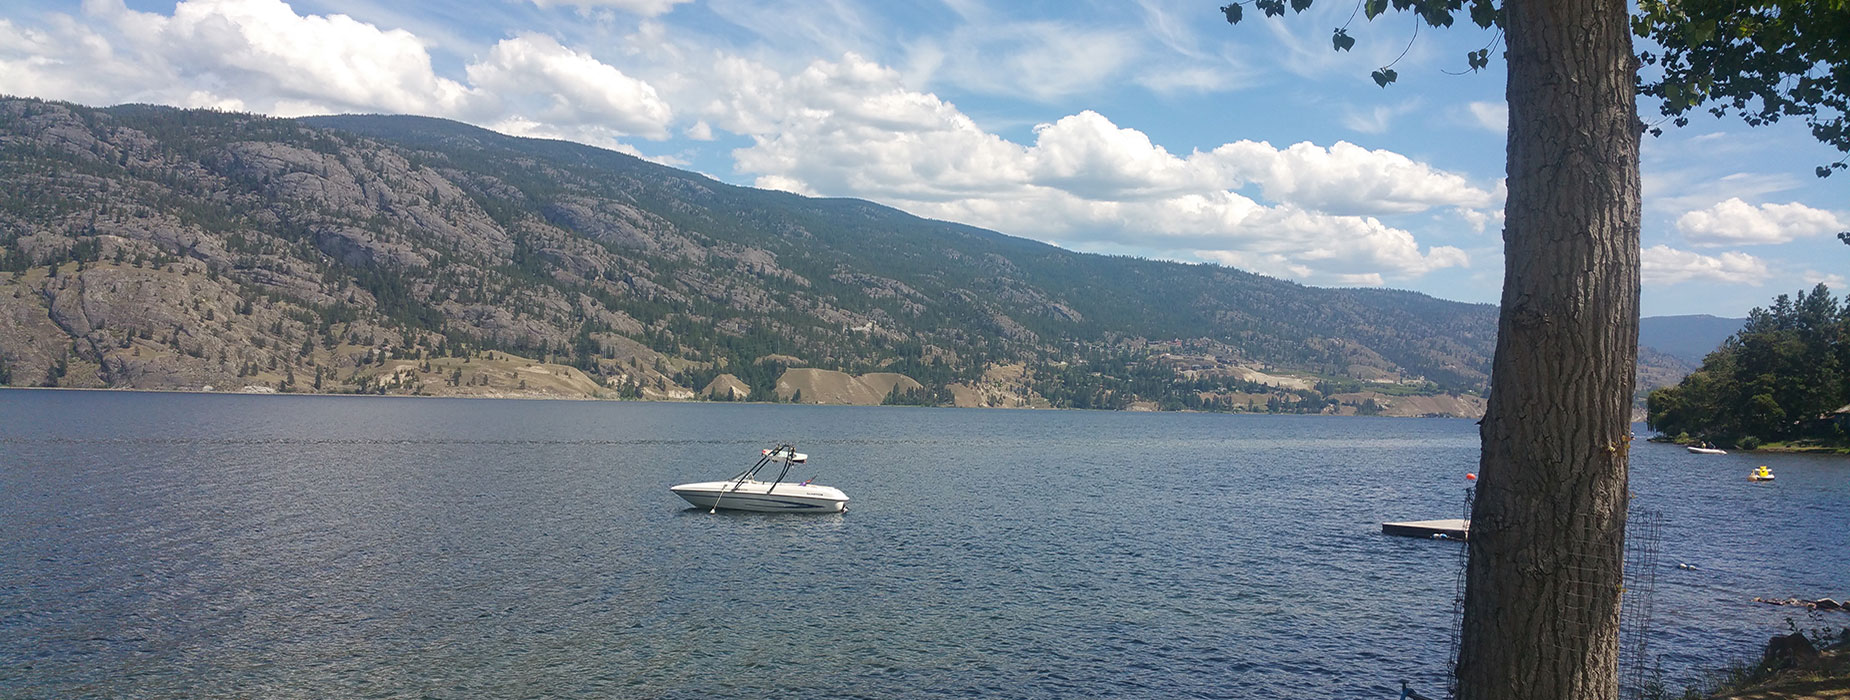 EasyGo Holidays offers a fabulous alternative to hotel stays during your visit to the Okanagan Valley of British Columbia.